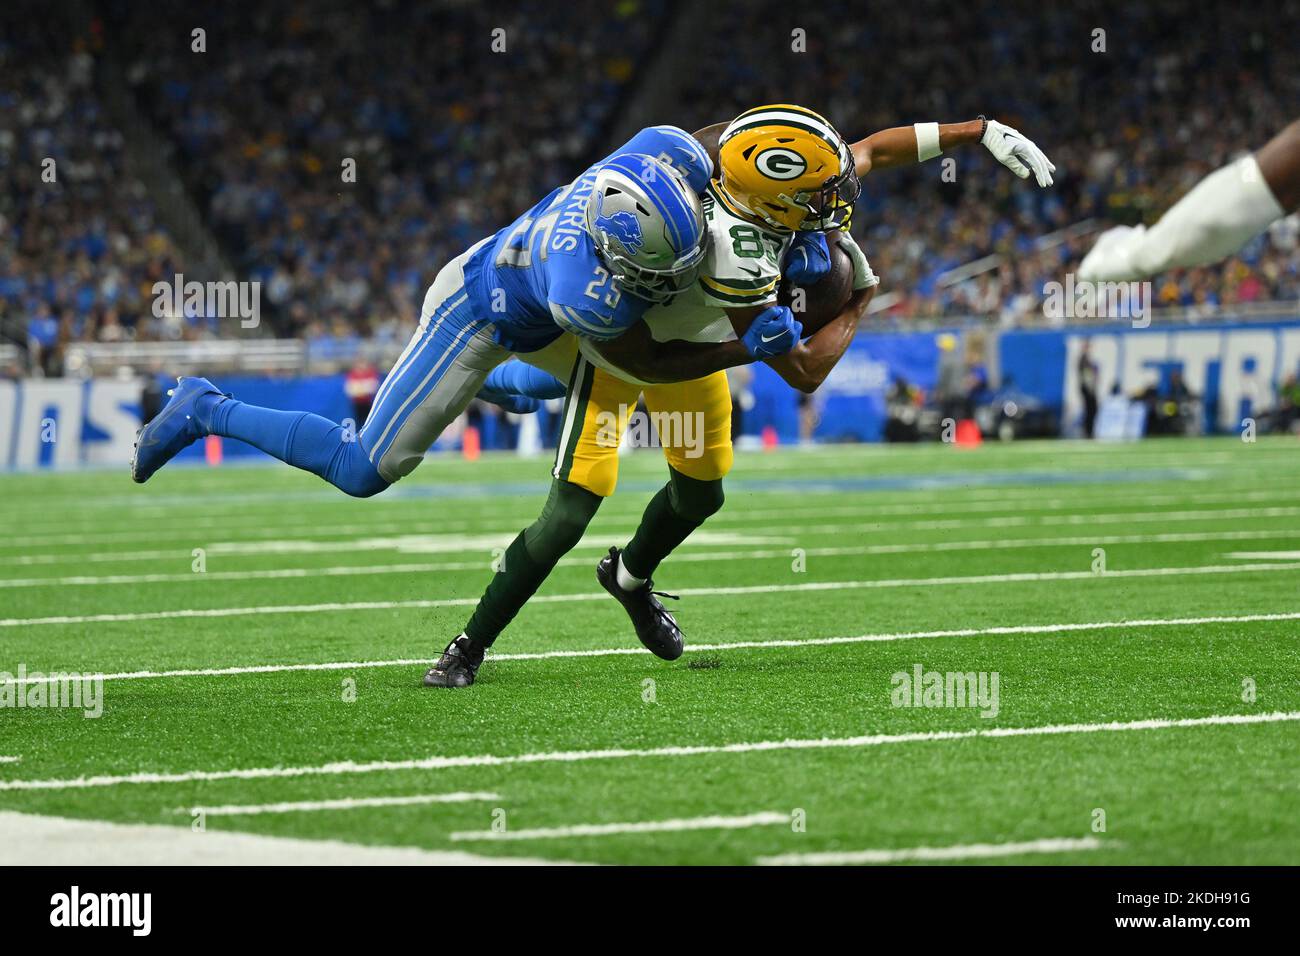 DETROIT, MI - NOVEMBER 06: Detroit Lions Safety (25) Will Harris wraps up Green Bay Packers WR Samori Toure (83) during the game between Green Bay Packers and Detroit Lions on November 6, 2022 in Detroit, MI (Photo by Allan Dranberg/CSM) Credit: Cal Sport Media/Alamy Live News Stock Photo